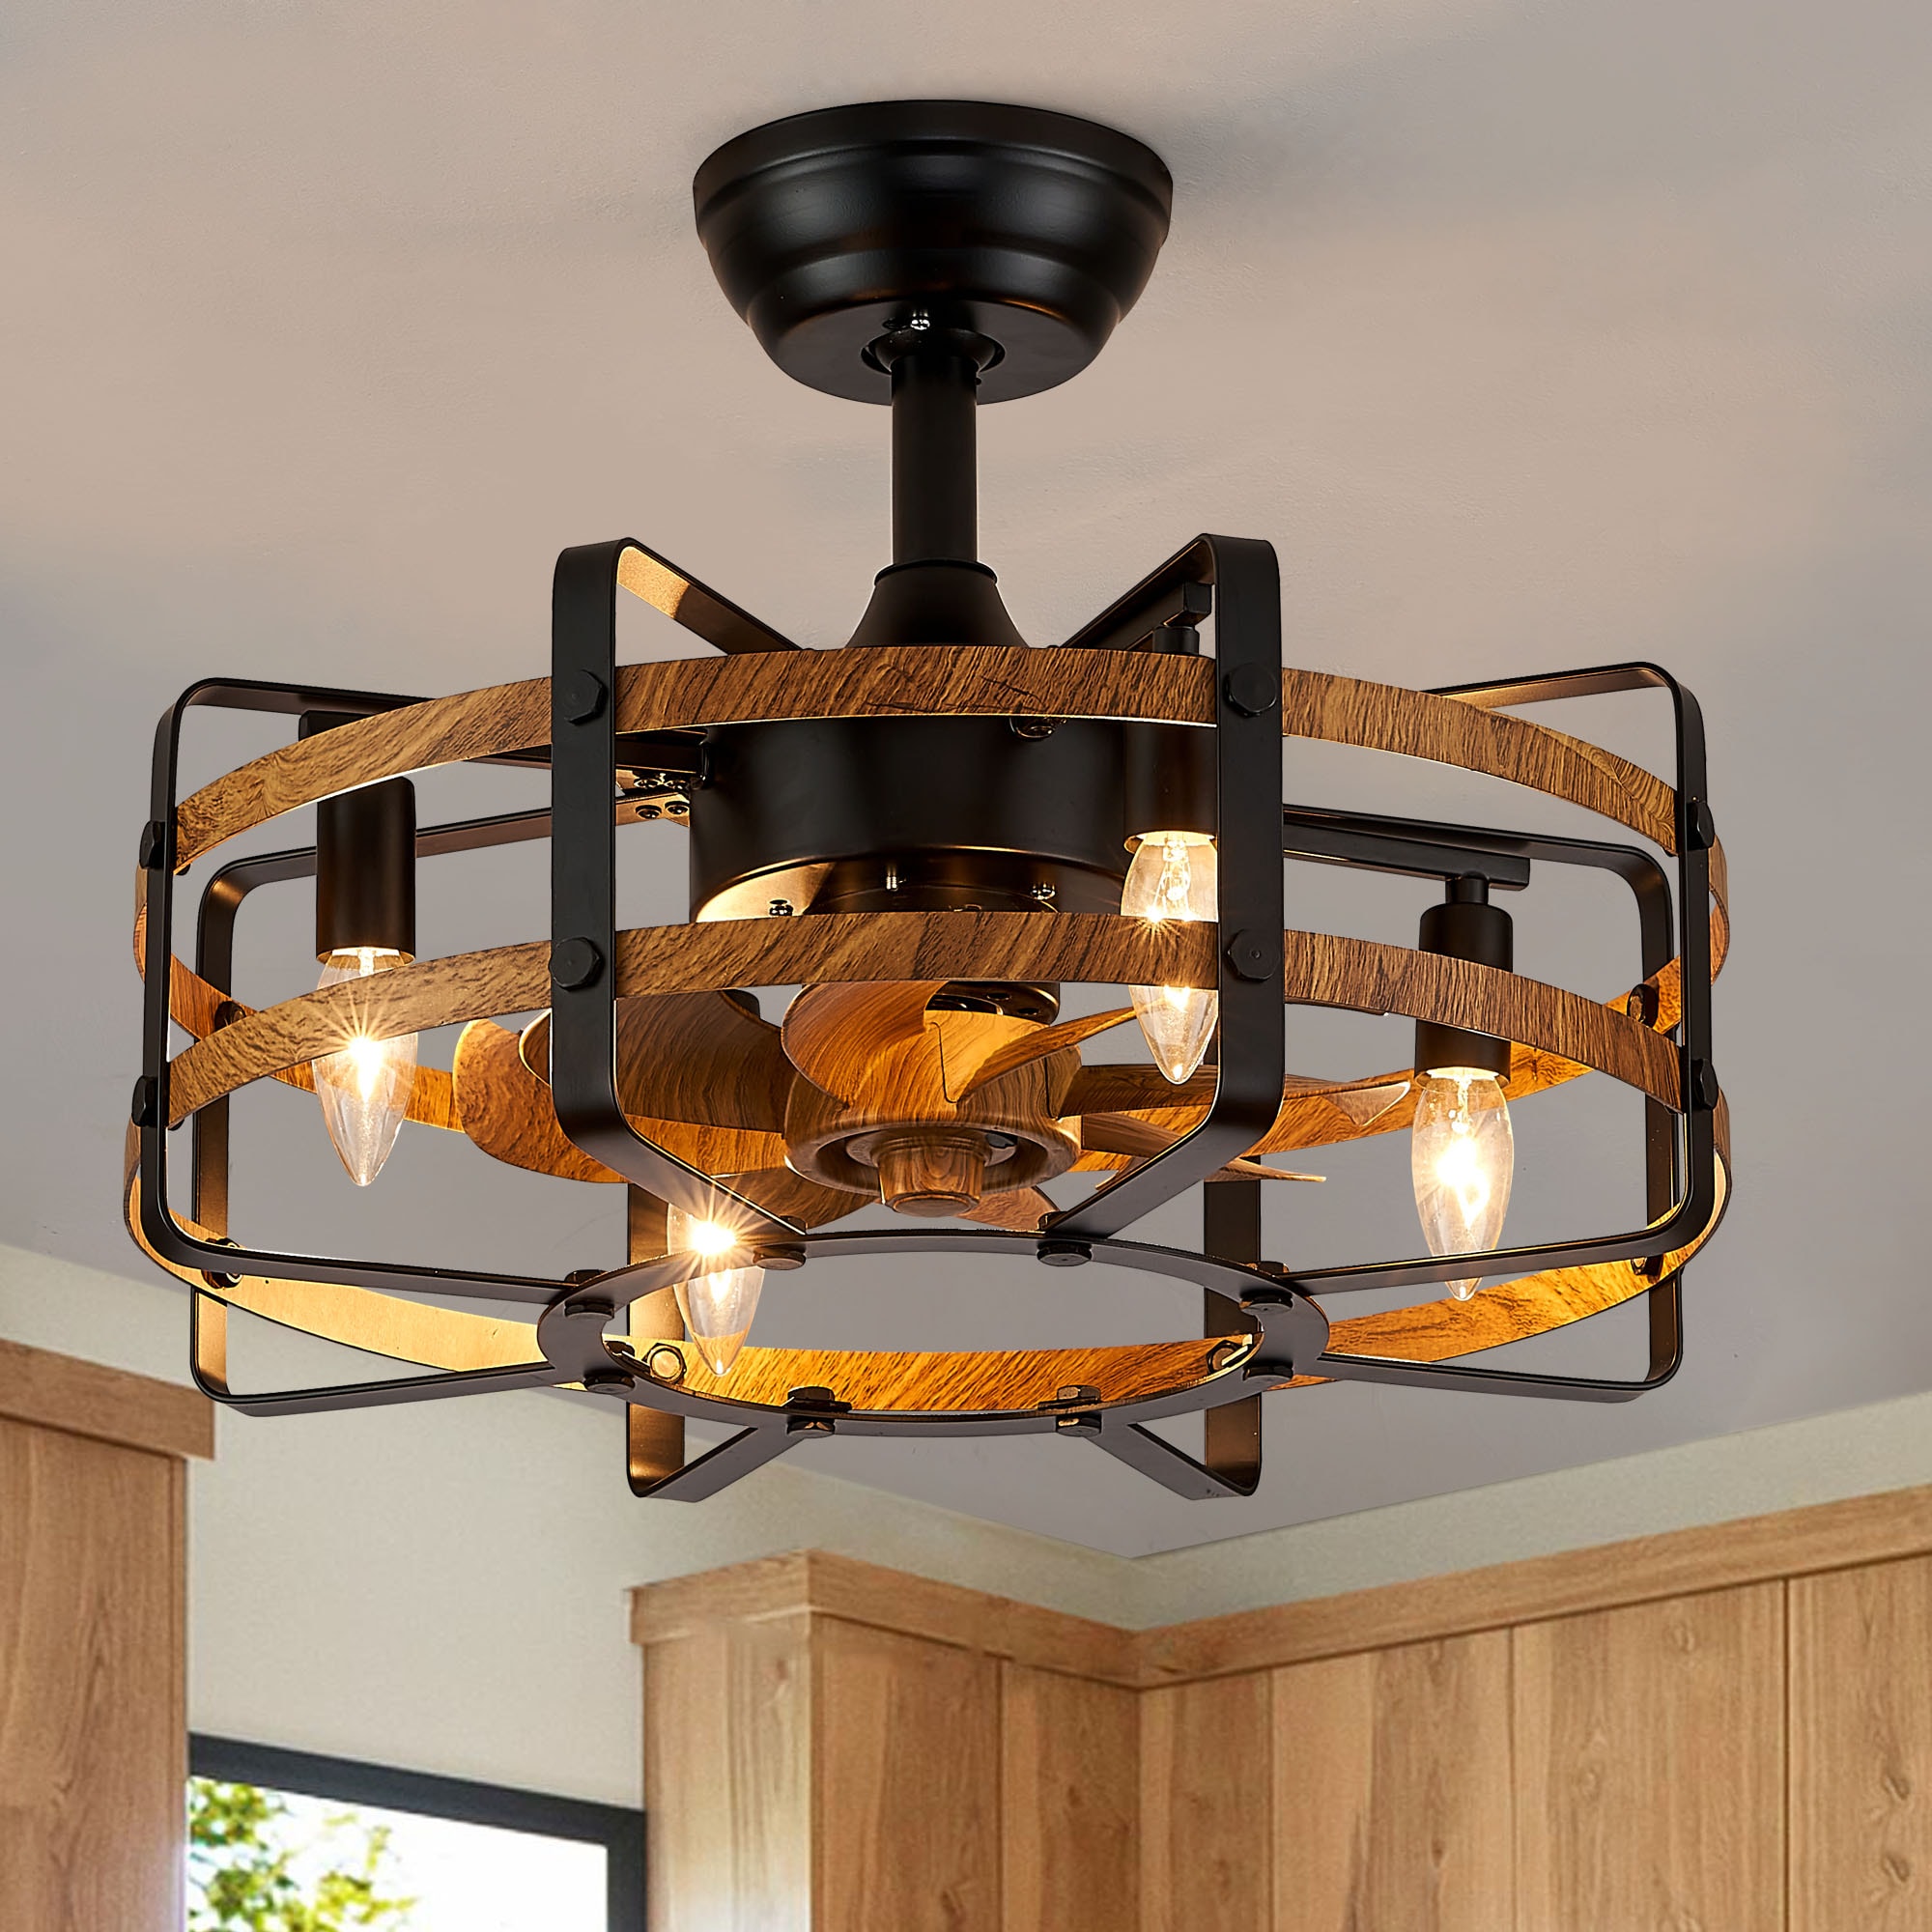 at Profile Modern Remote Ceiling department and (8-Blade) Fans Fandelier Low in 20-in Indoor Wood the Antoine Grain Black Farmhouse Fan Ceiling Cage